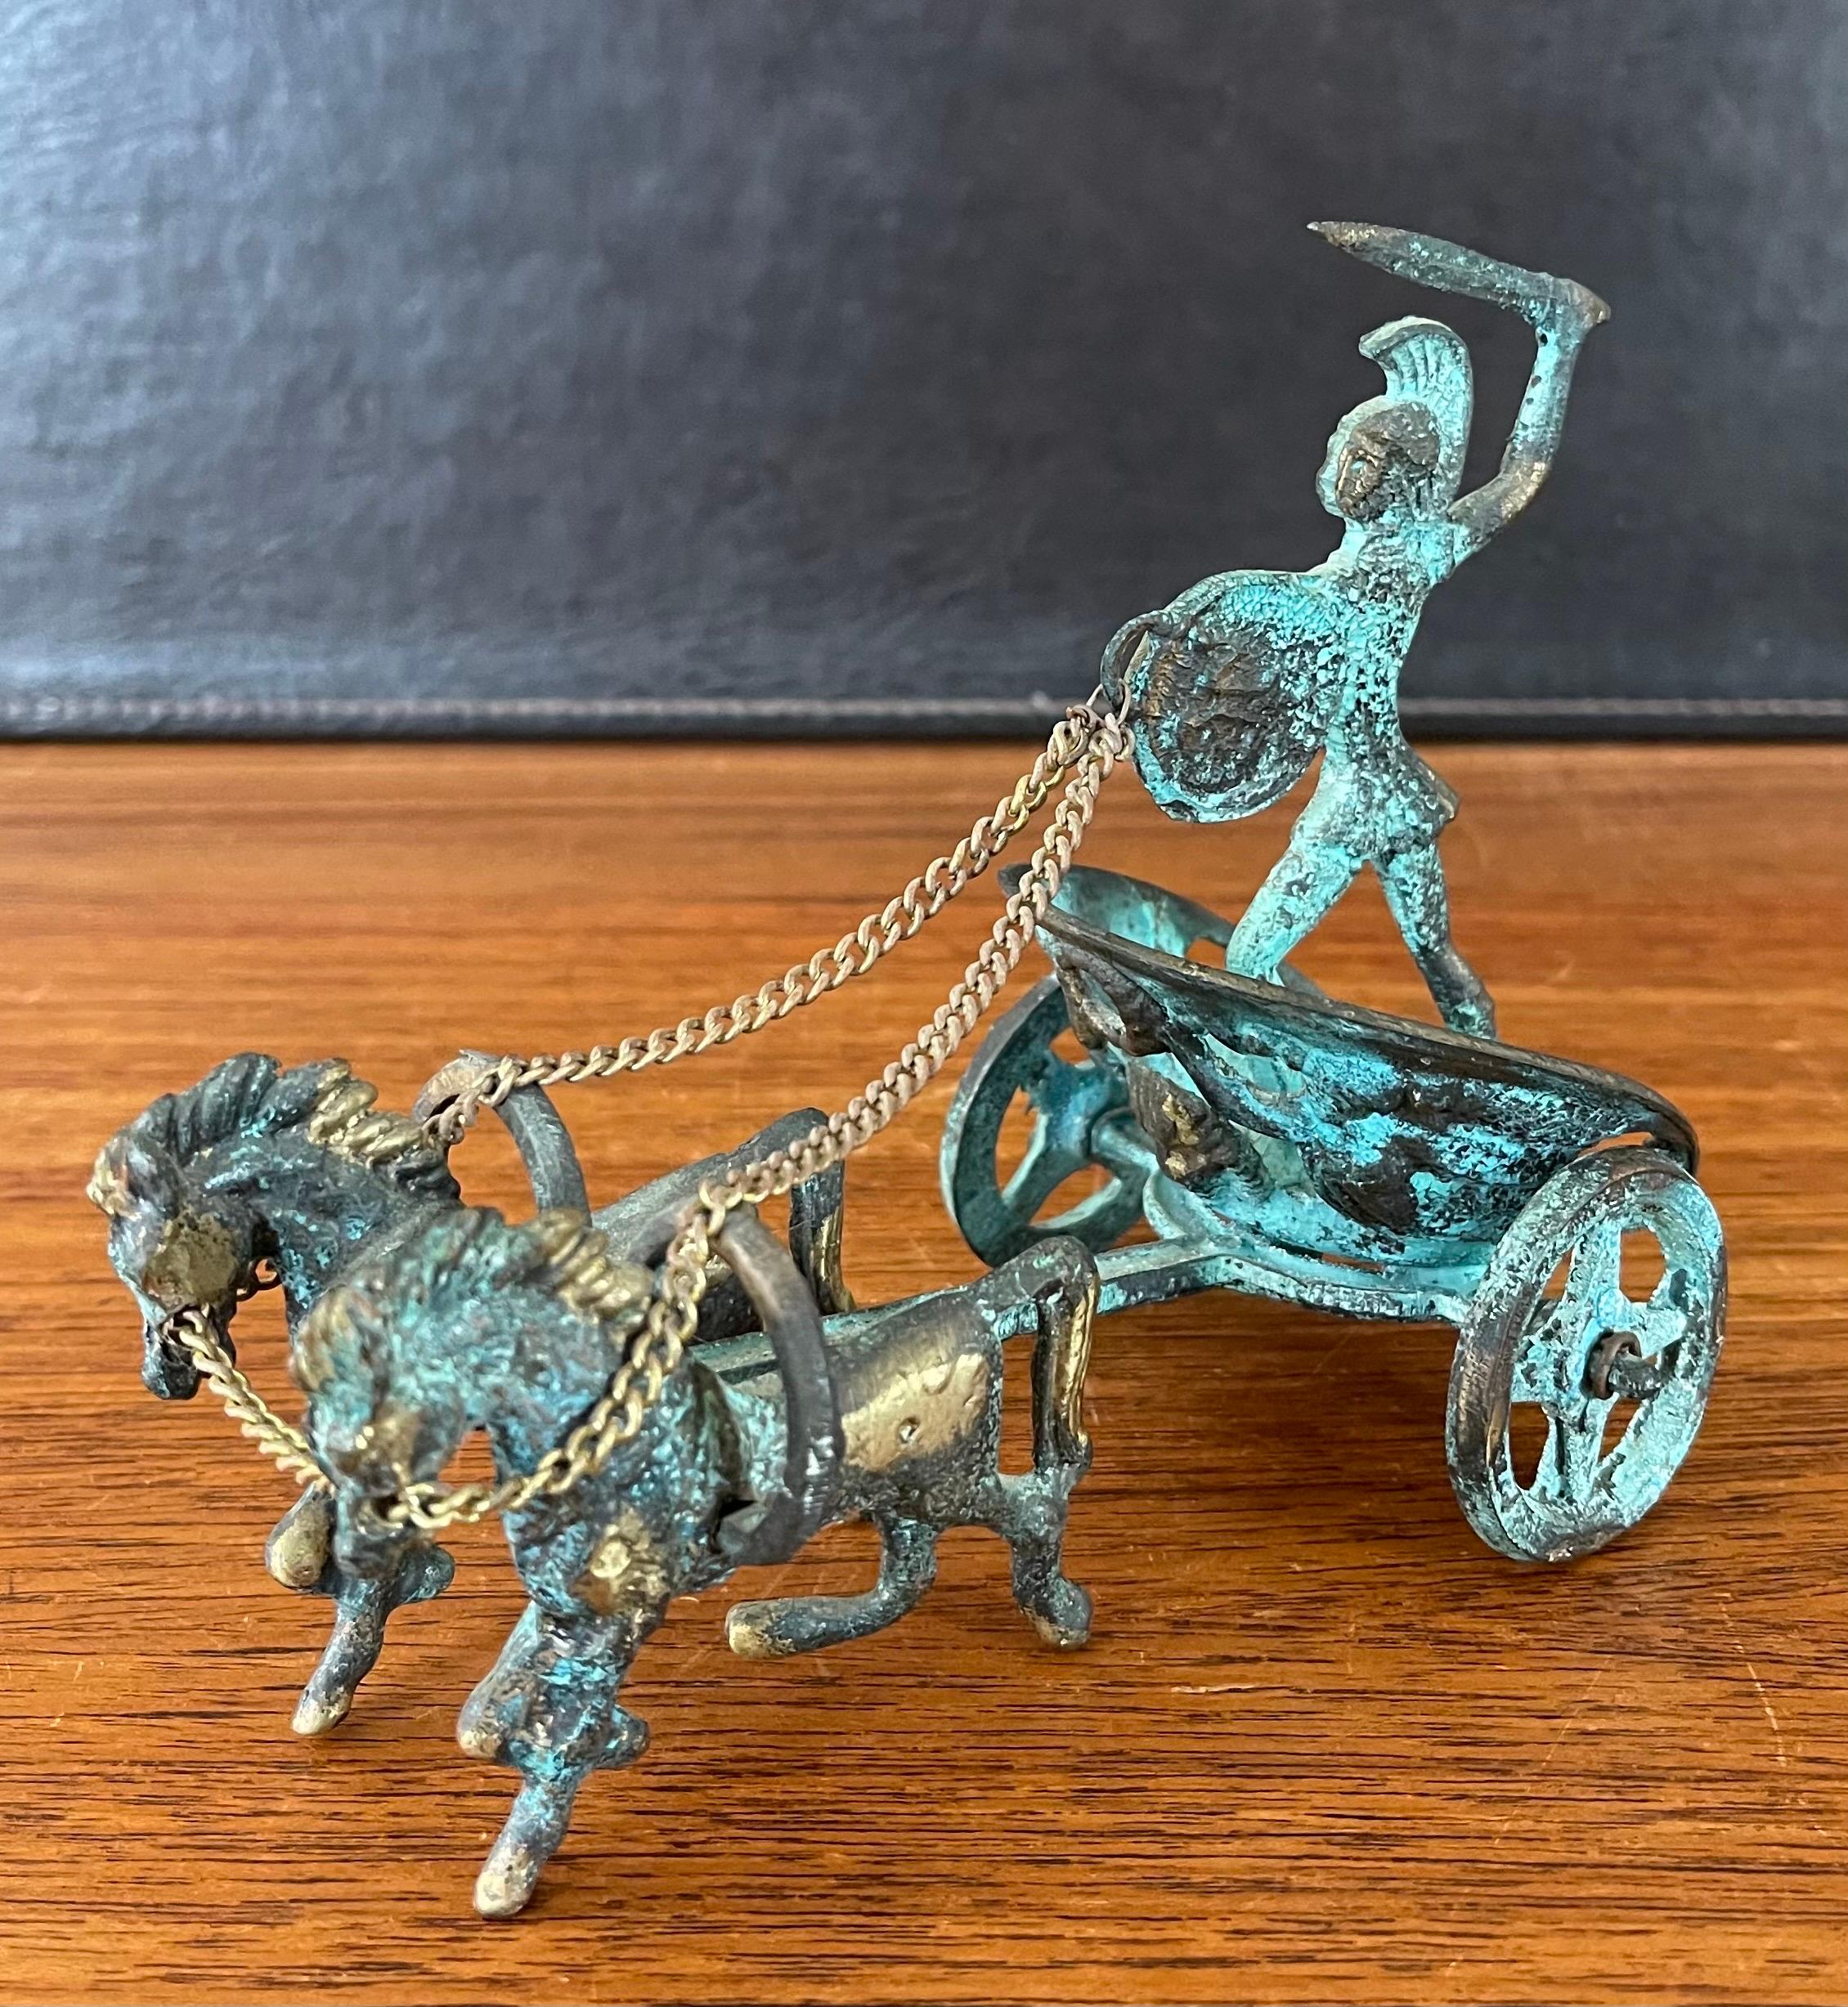 A cool verdigris bronze horse and chariot sculpture with trojan warrior from Greece, circa 1970s. The piece is in very good vintage conditioned measures 3.5